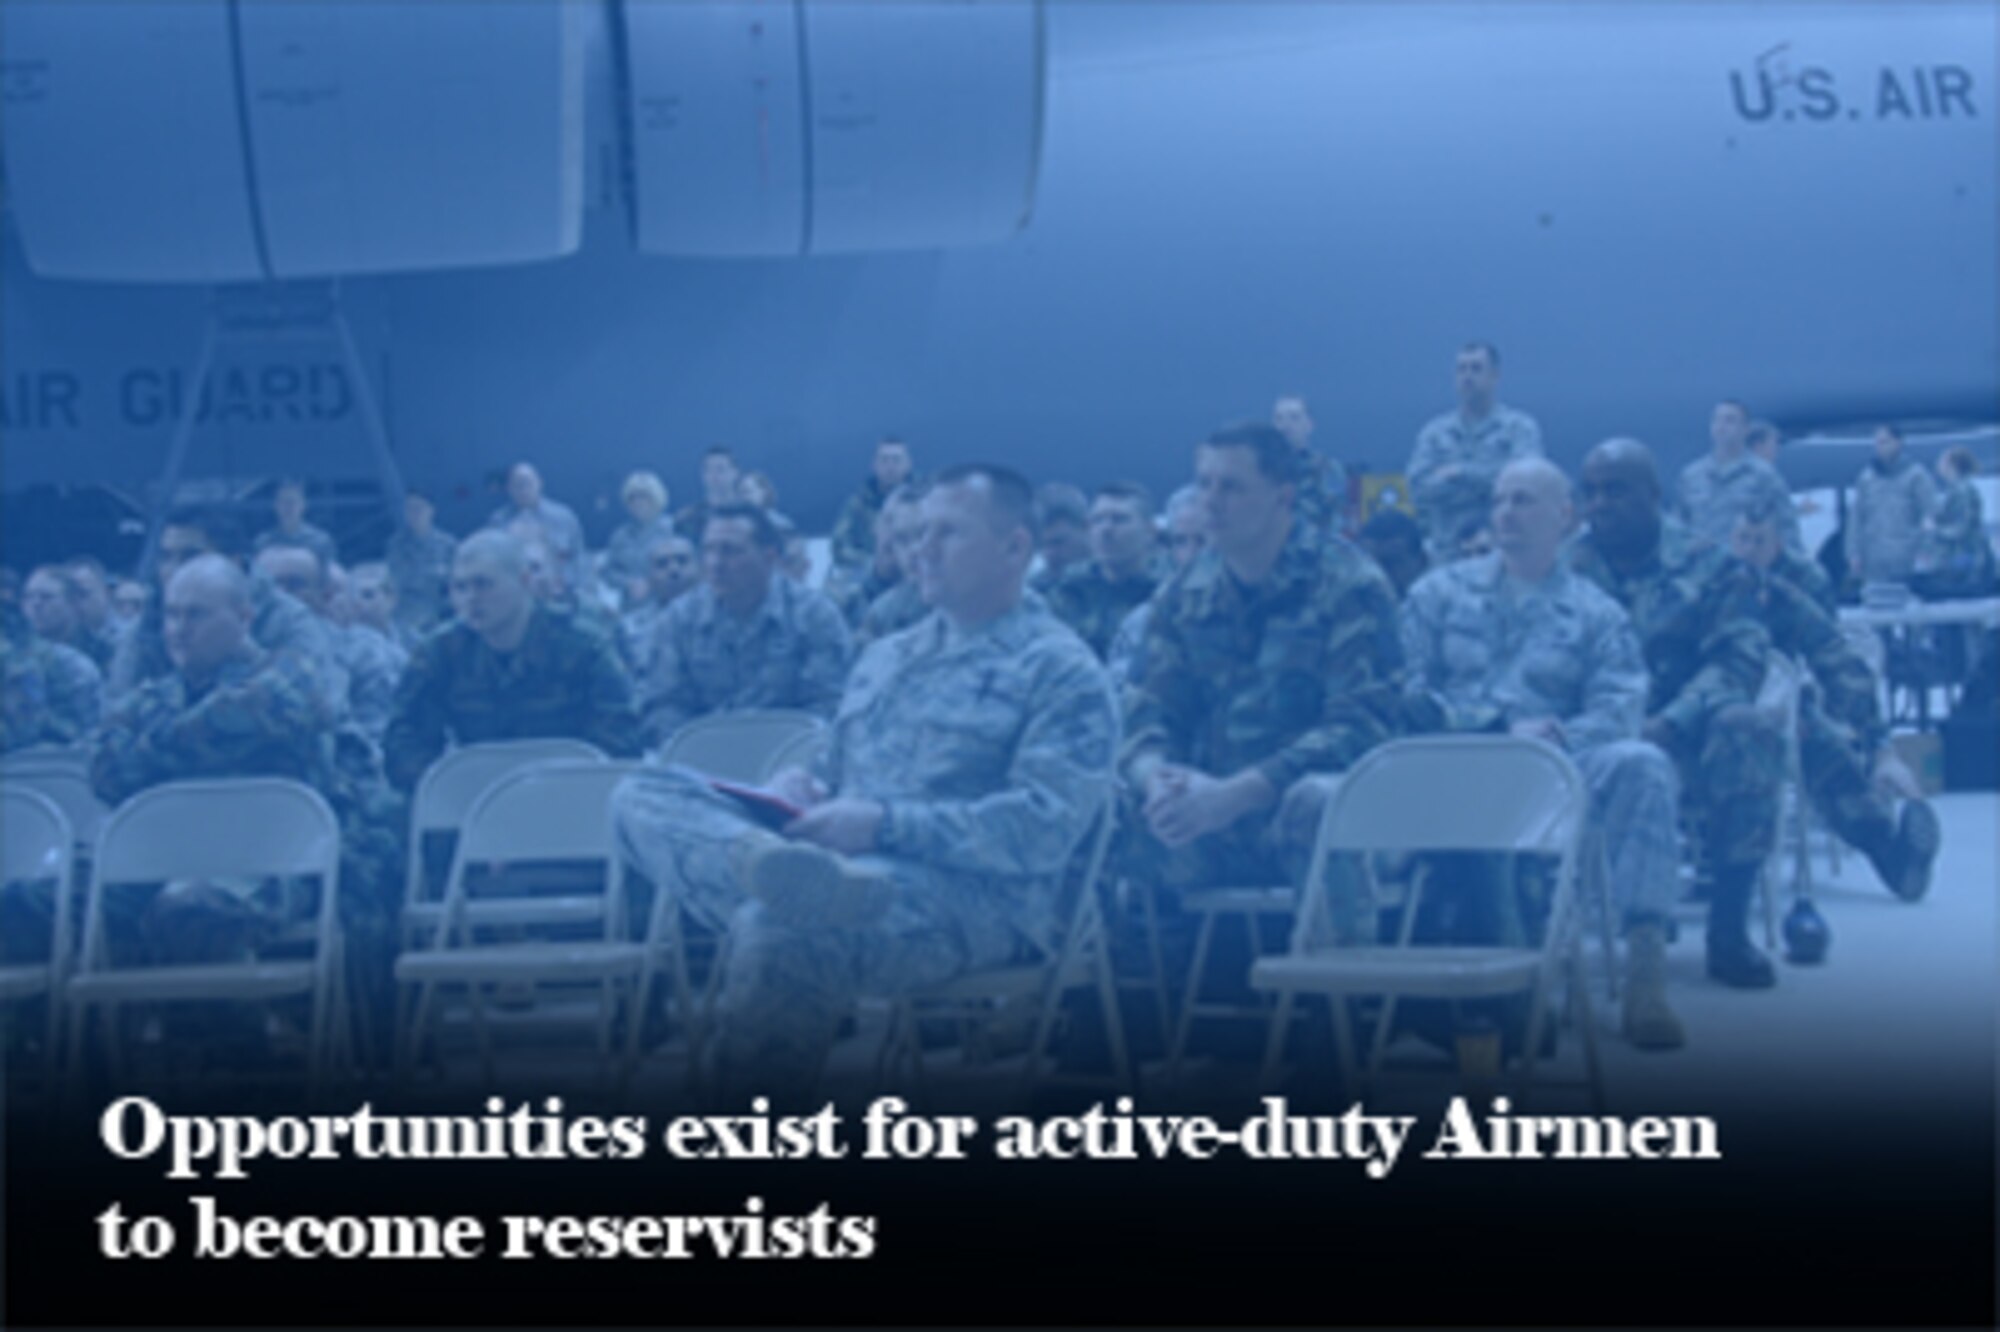 Opportunities exist for active-duty Airmen to become reservists